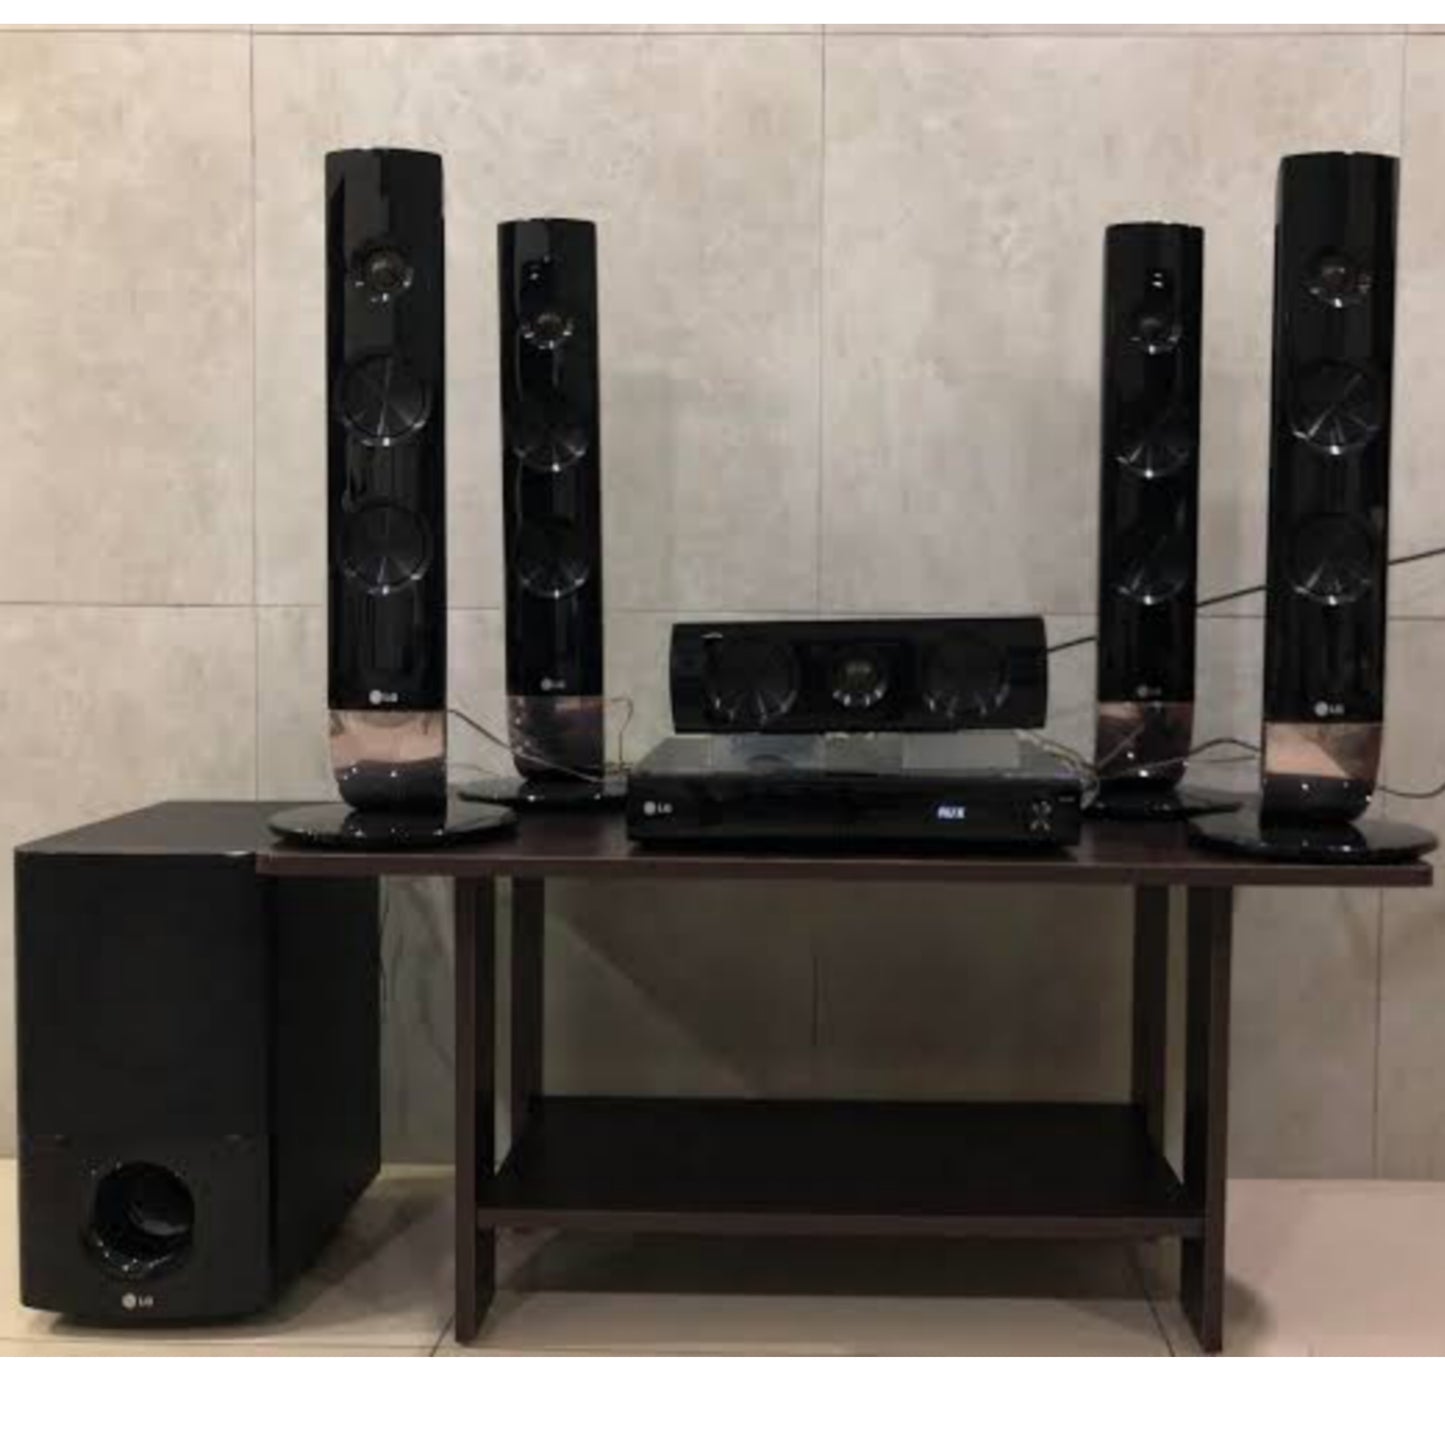 LG HT806TM 5.1Ch 850W DVD Standing Home Cinema System - Foreign Used